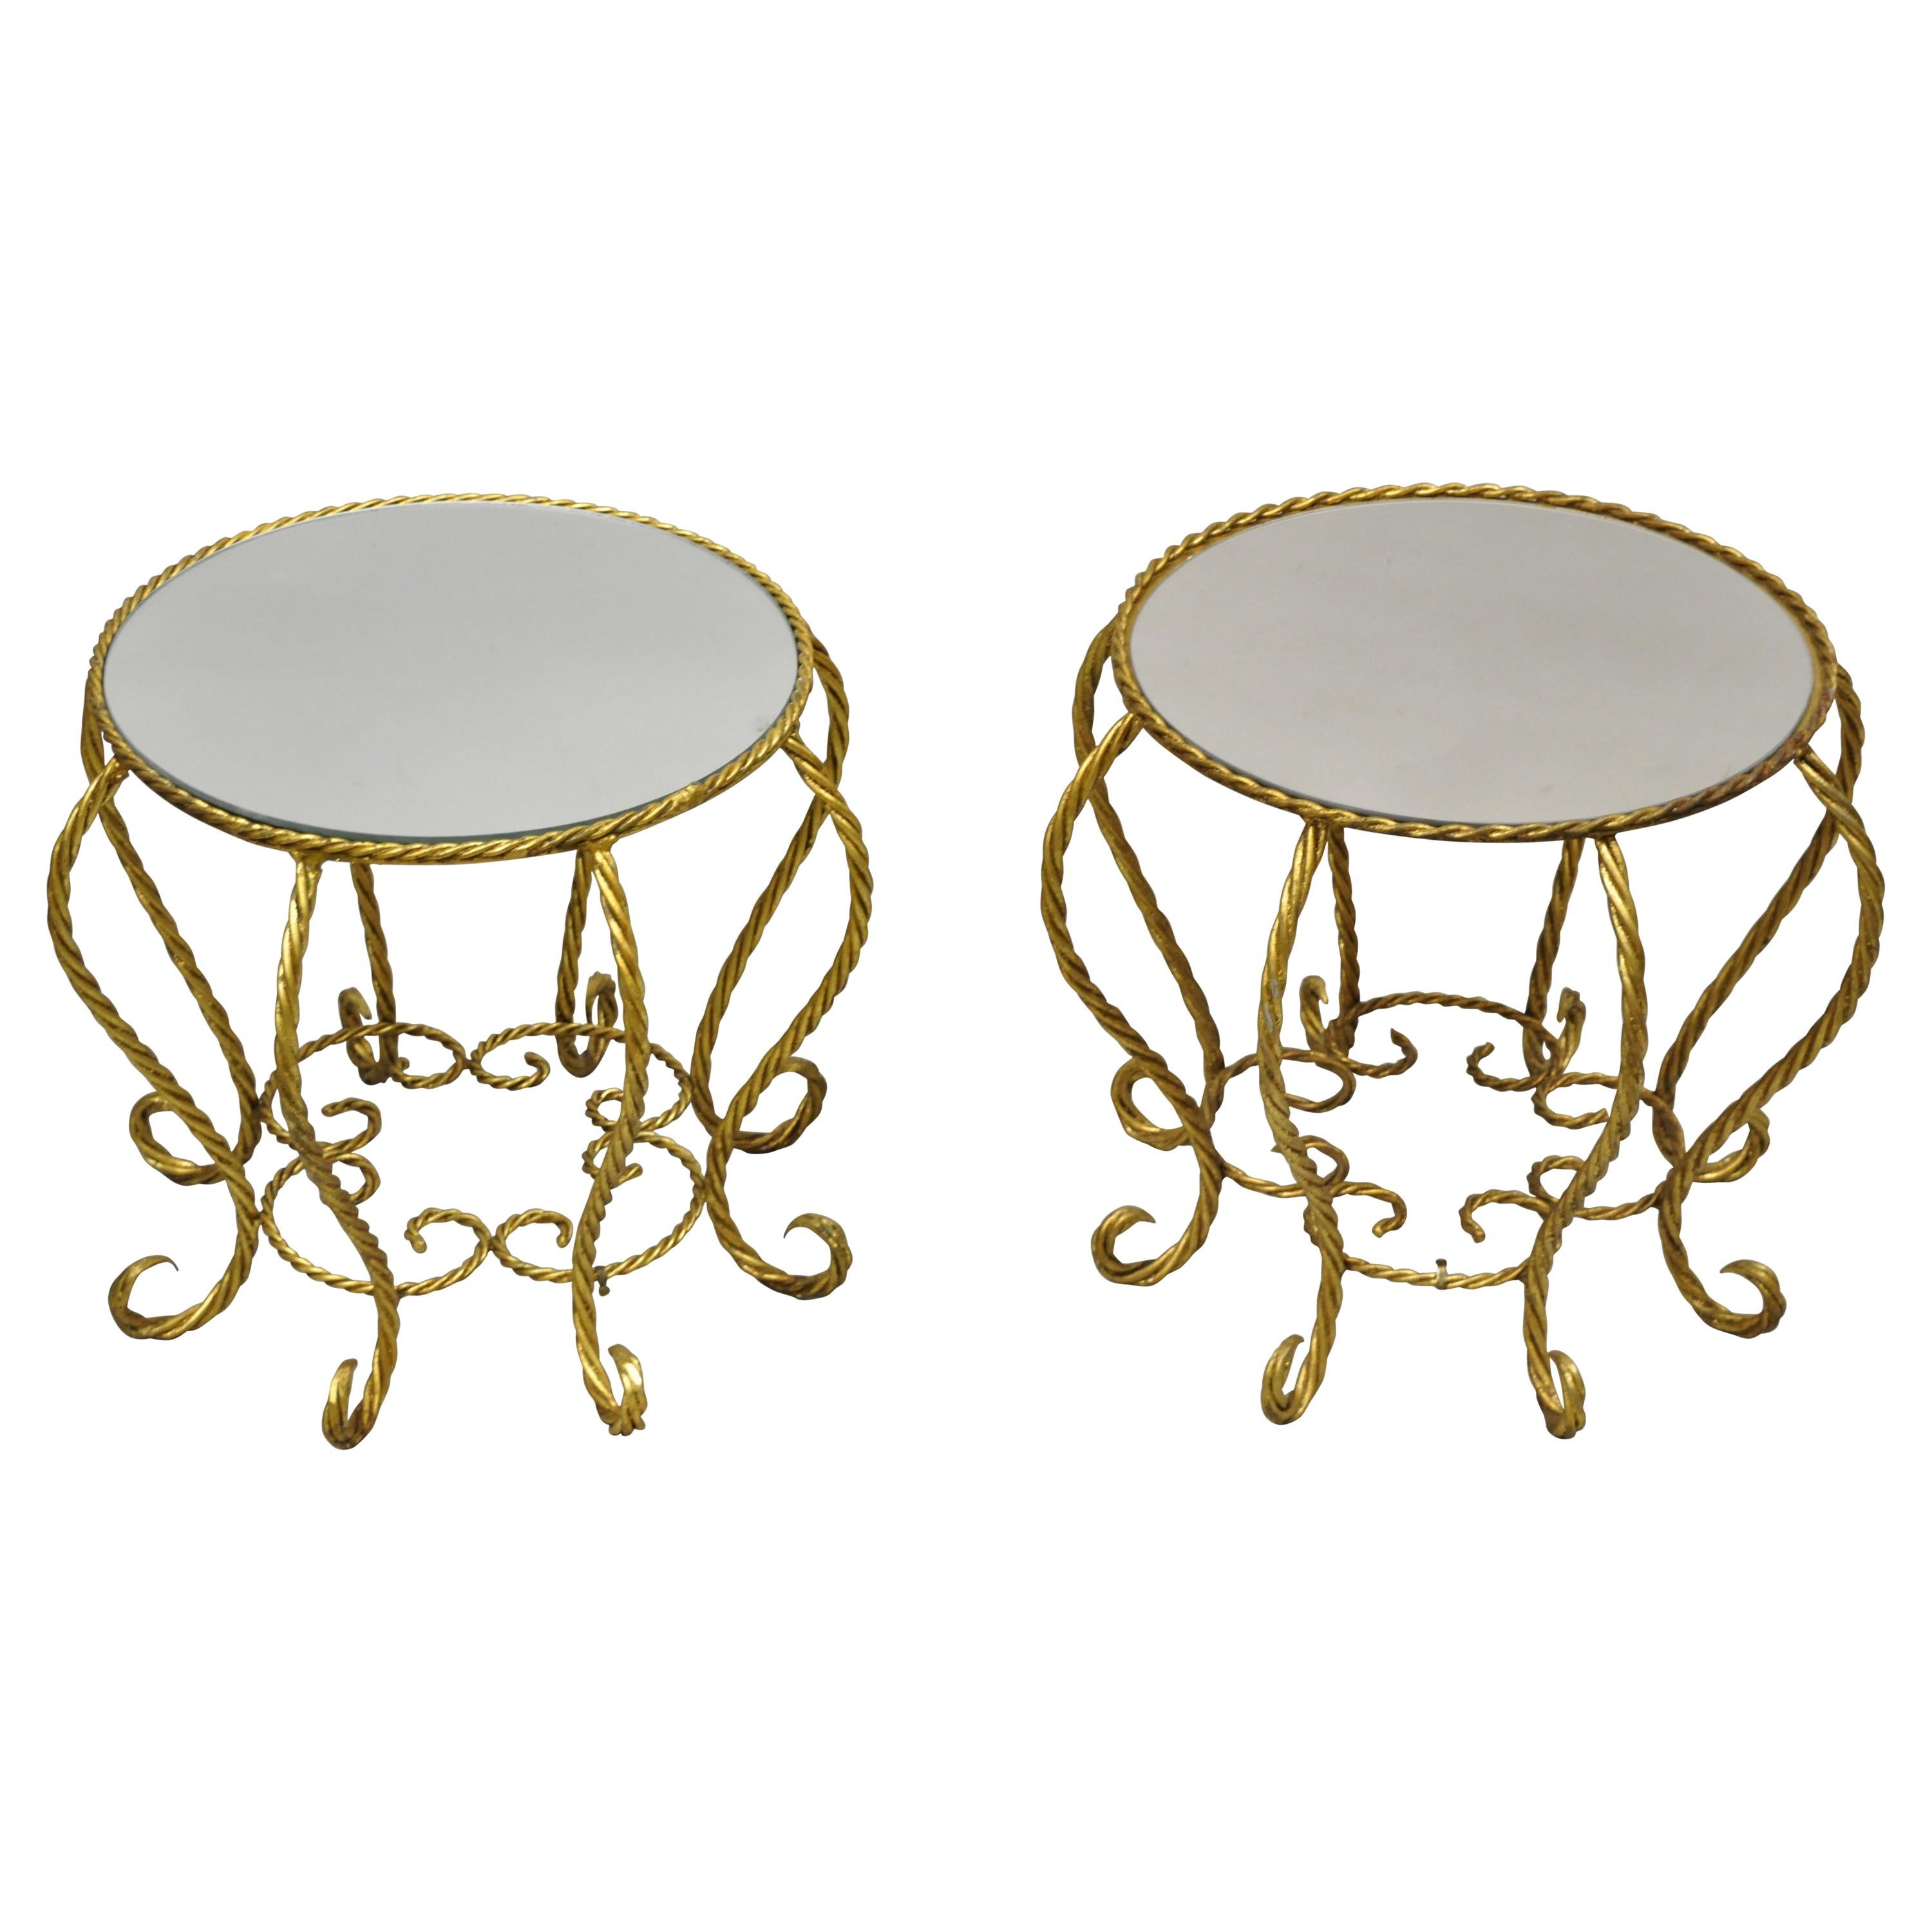 Vintage Italian Hollywood Regency Gold Gilt Glass Top Low Side Tables, a Pair